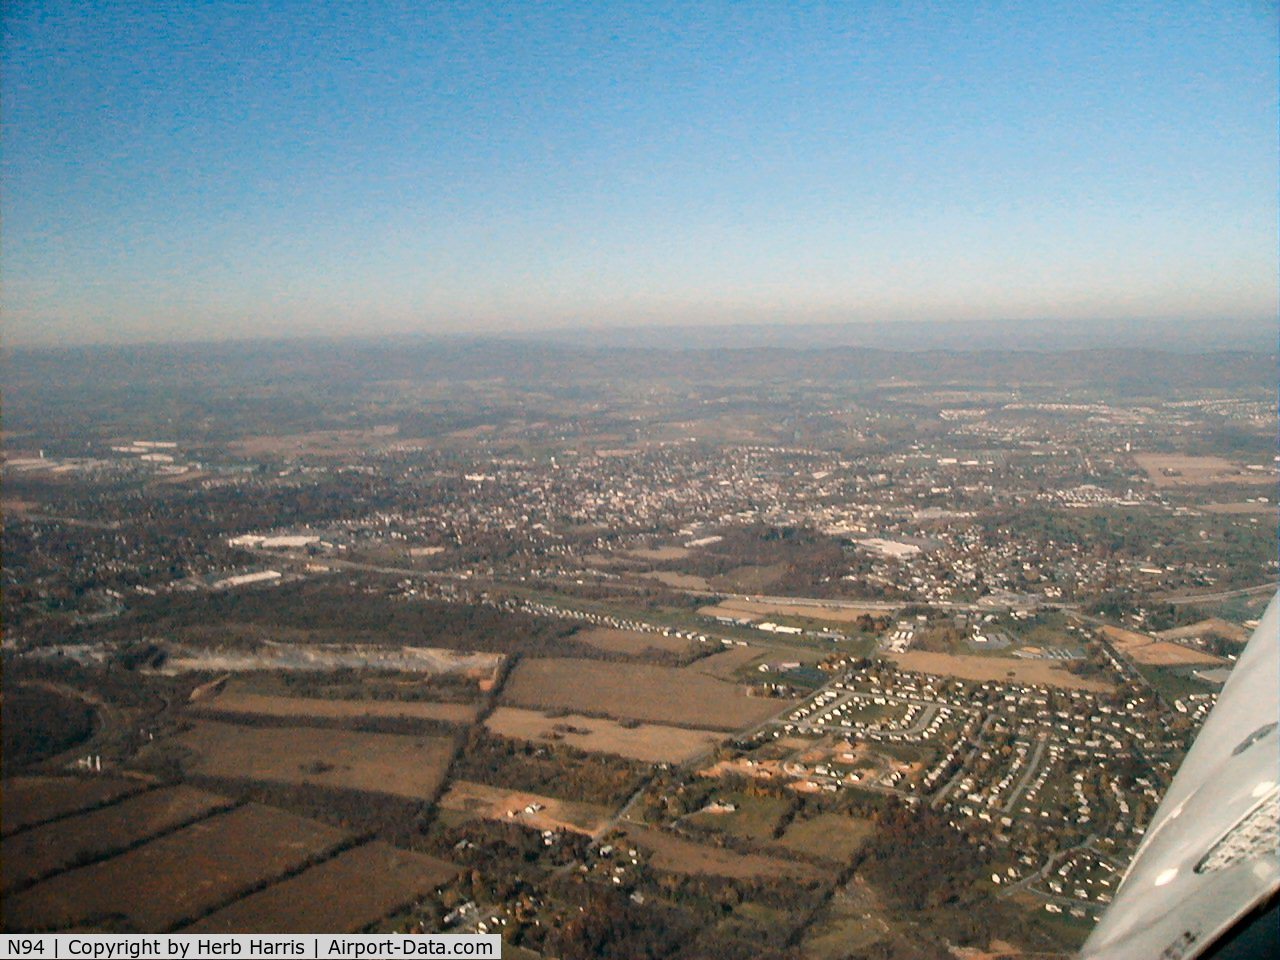 Carlisle Airport (N94) - Approaching airport - further out